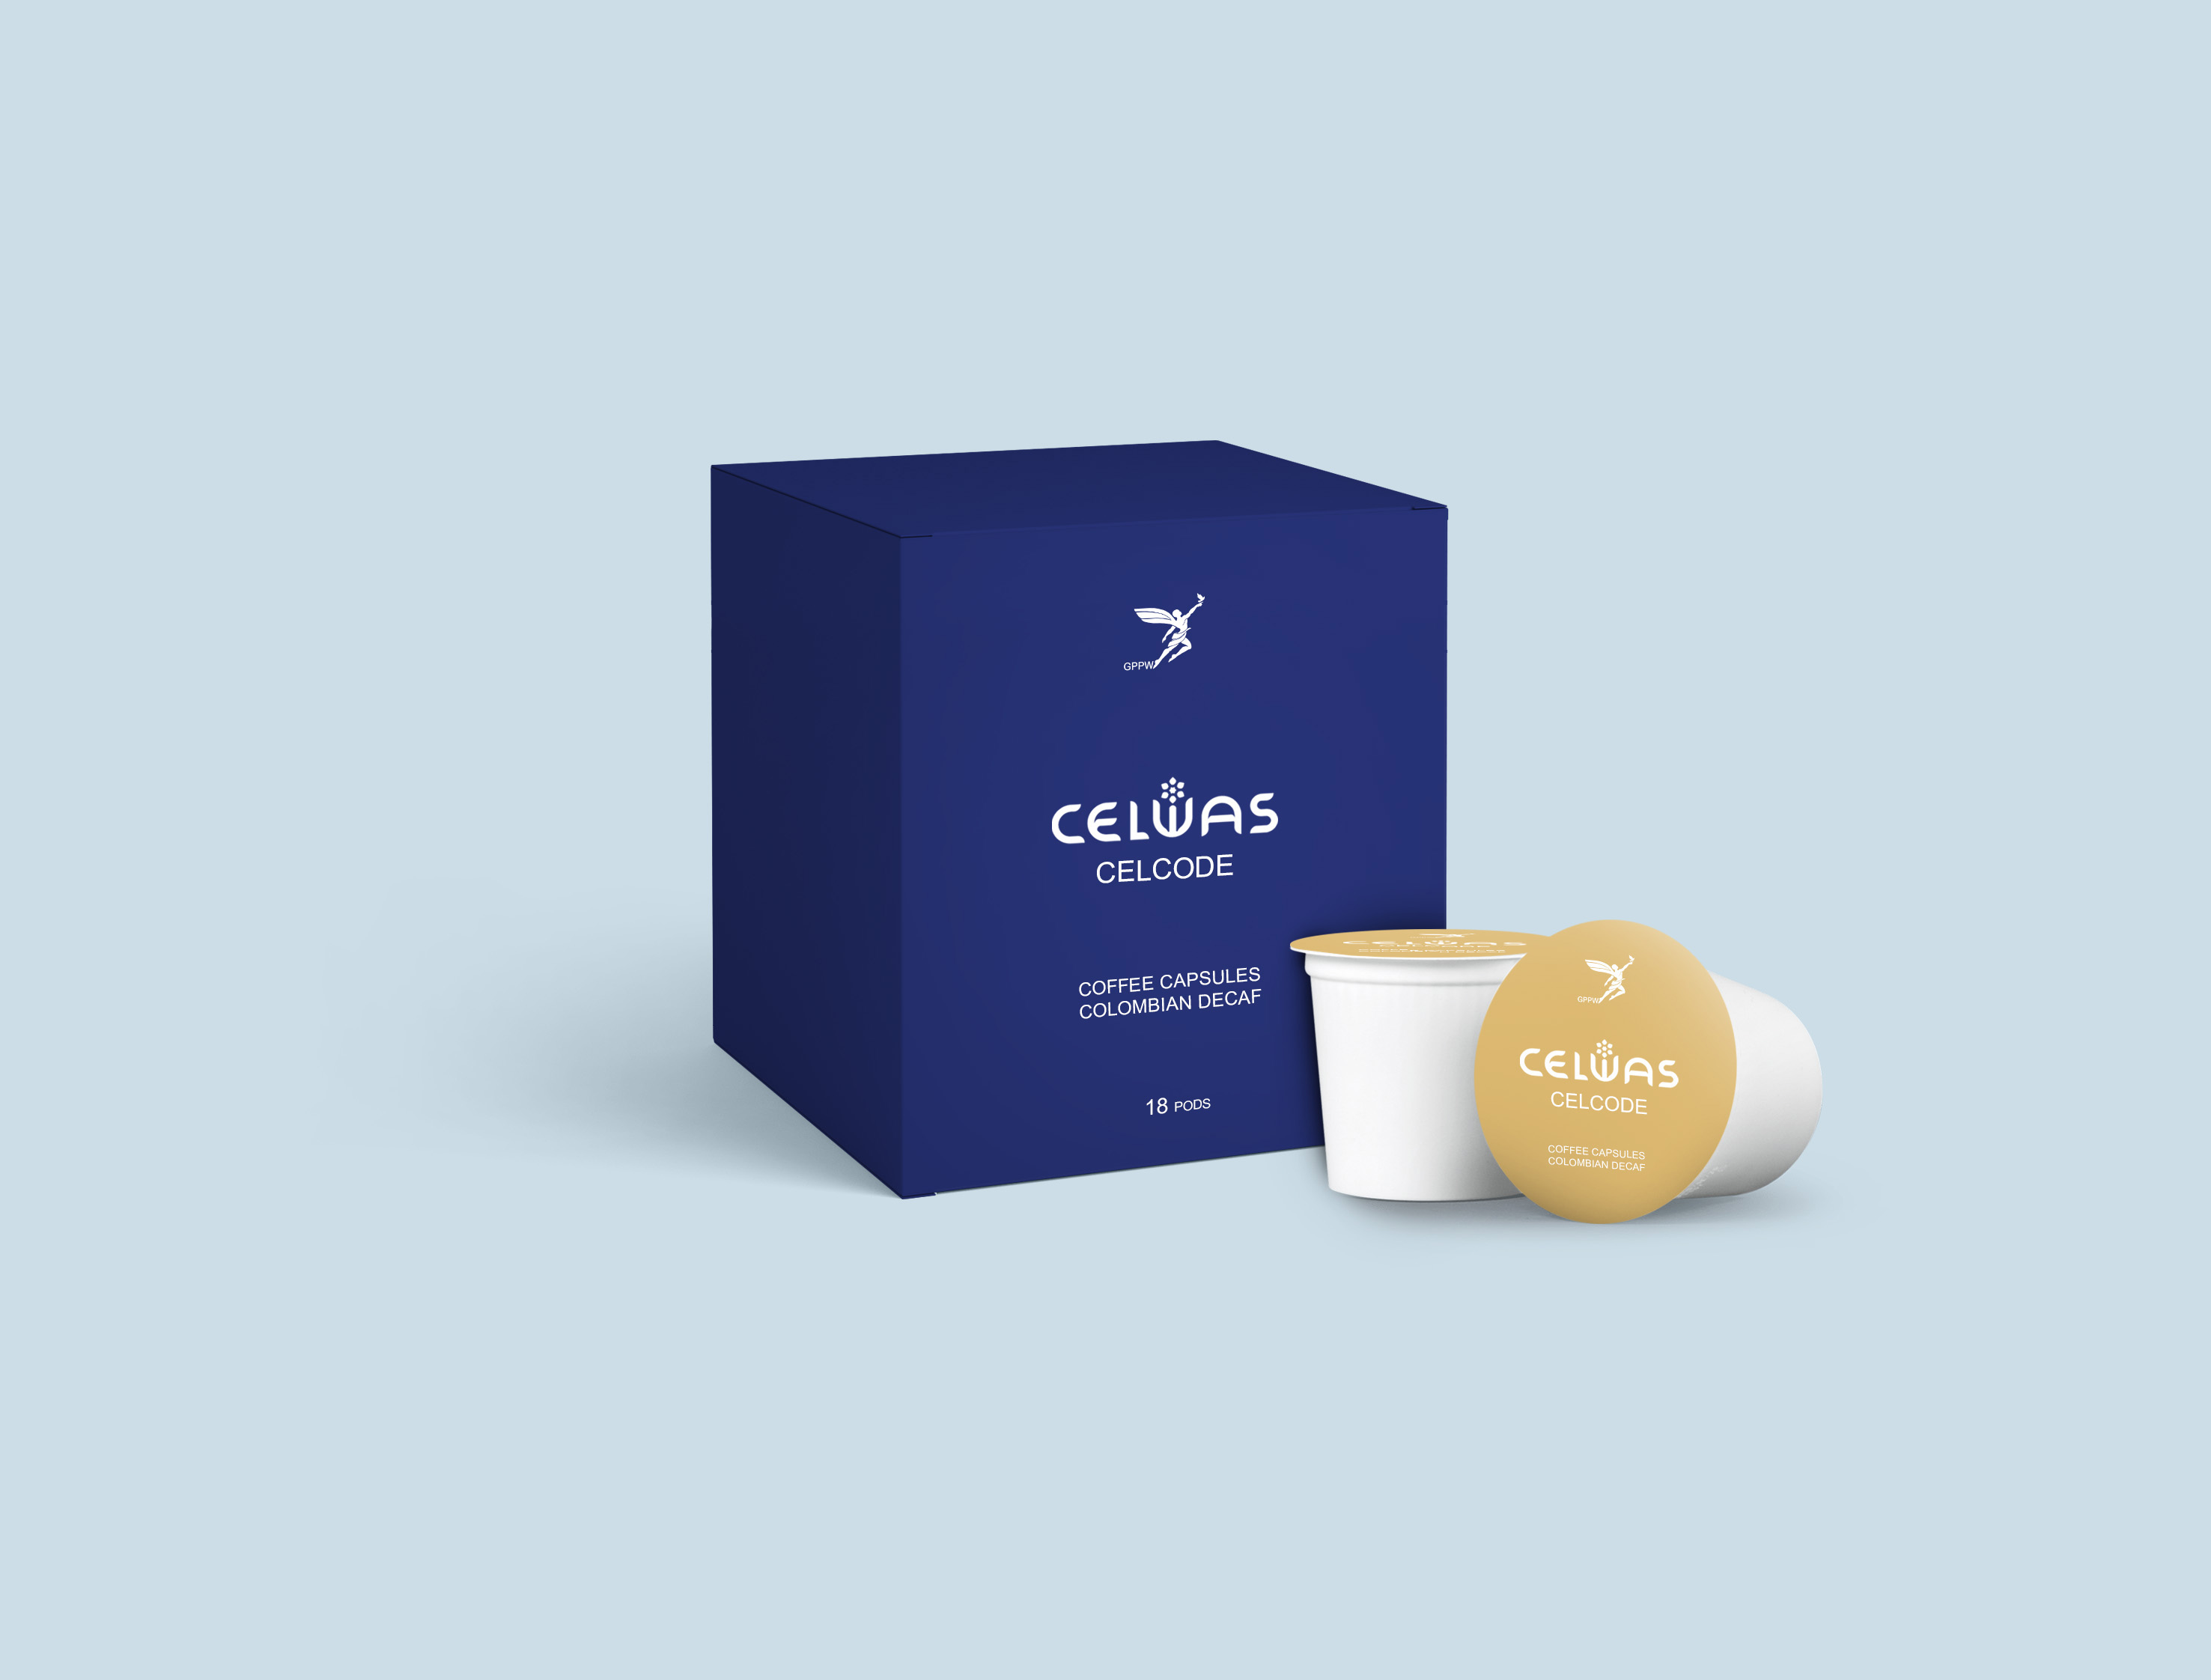 CELCODE<br /> coffee capsules